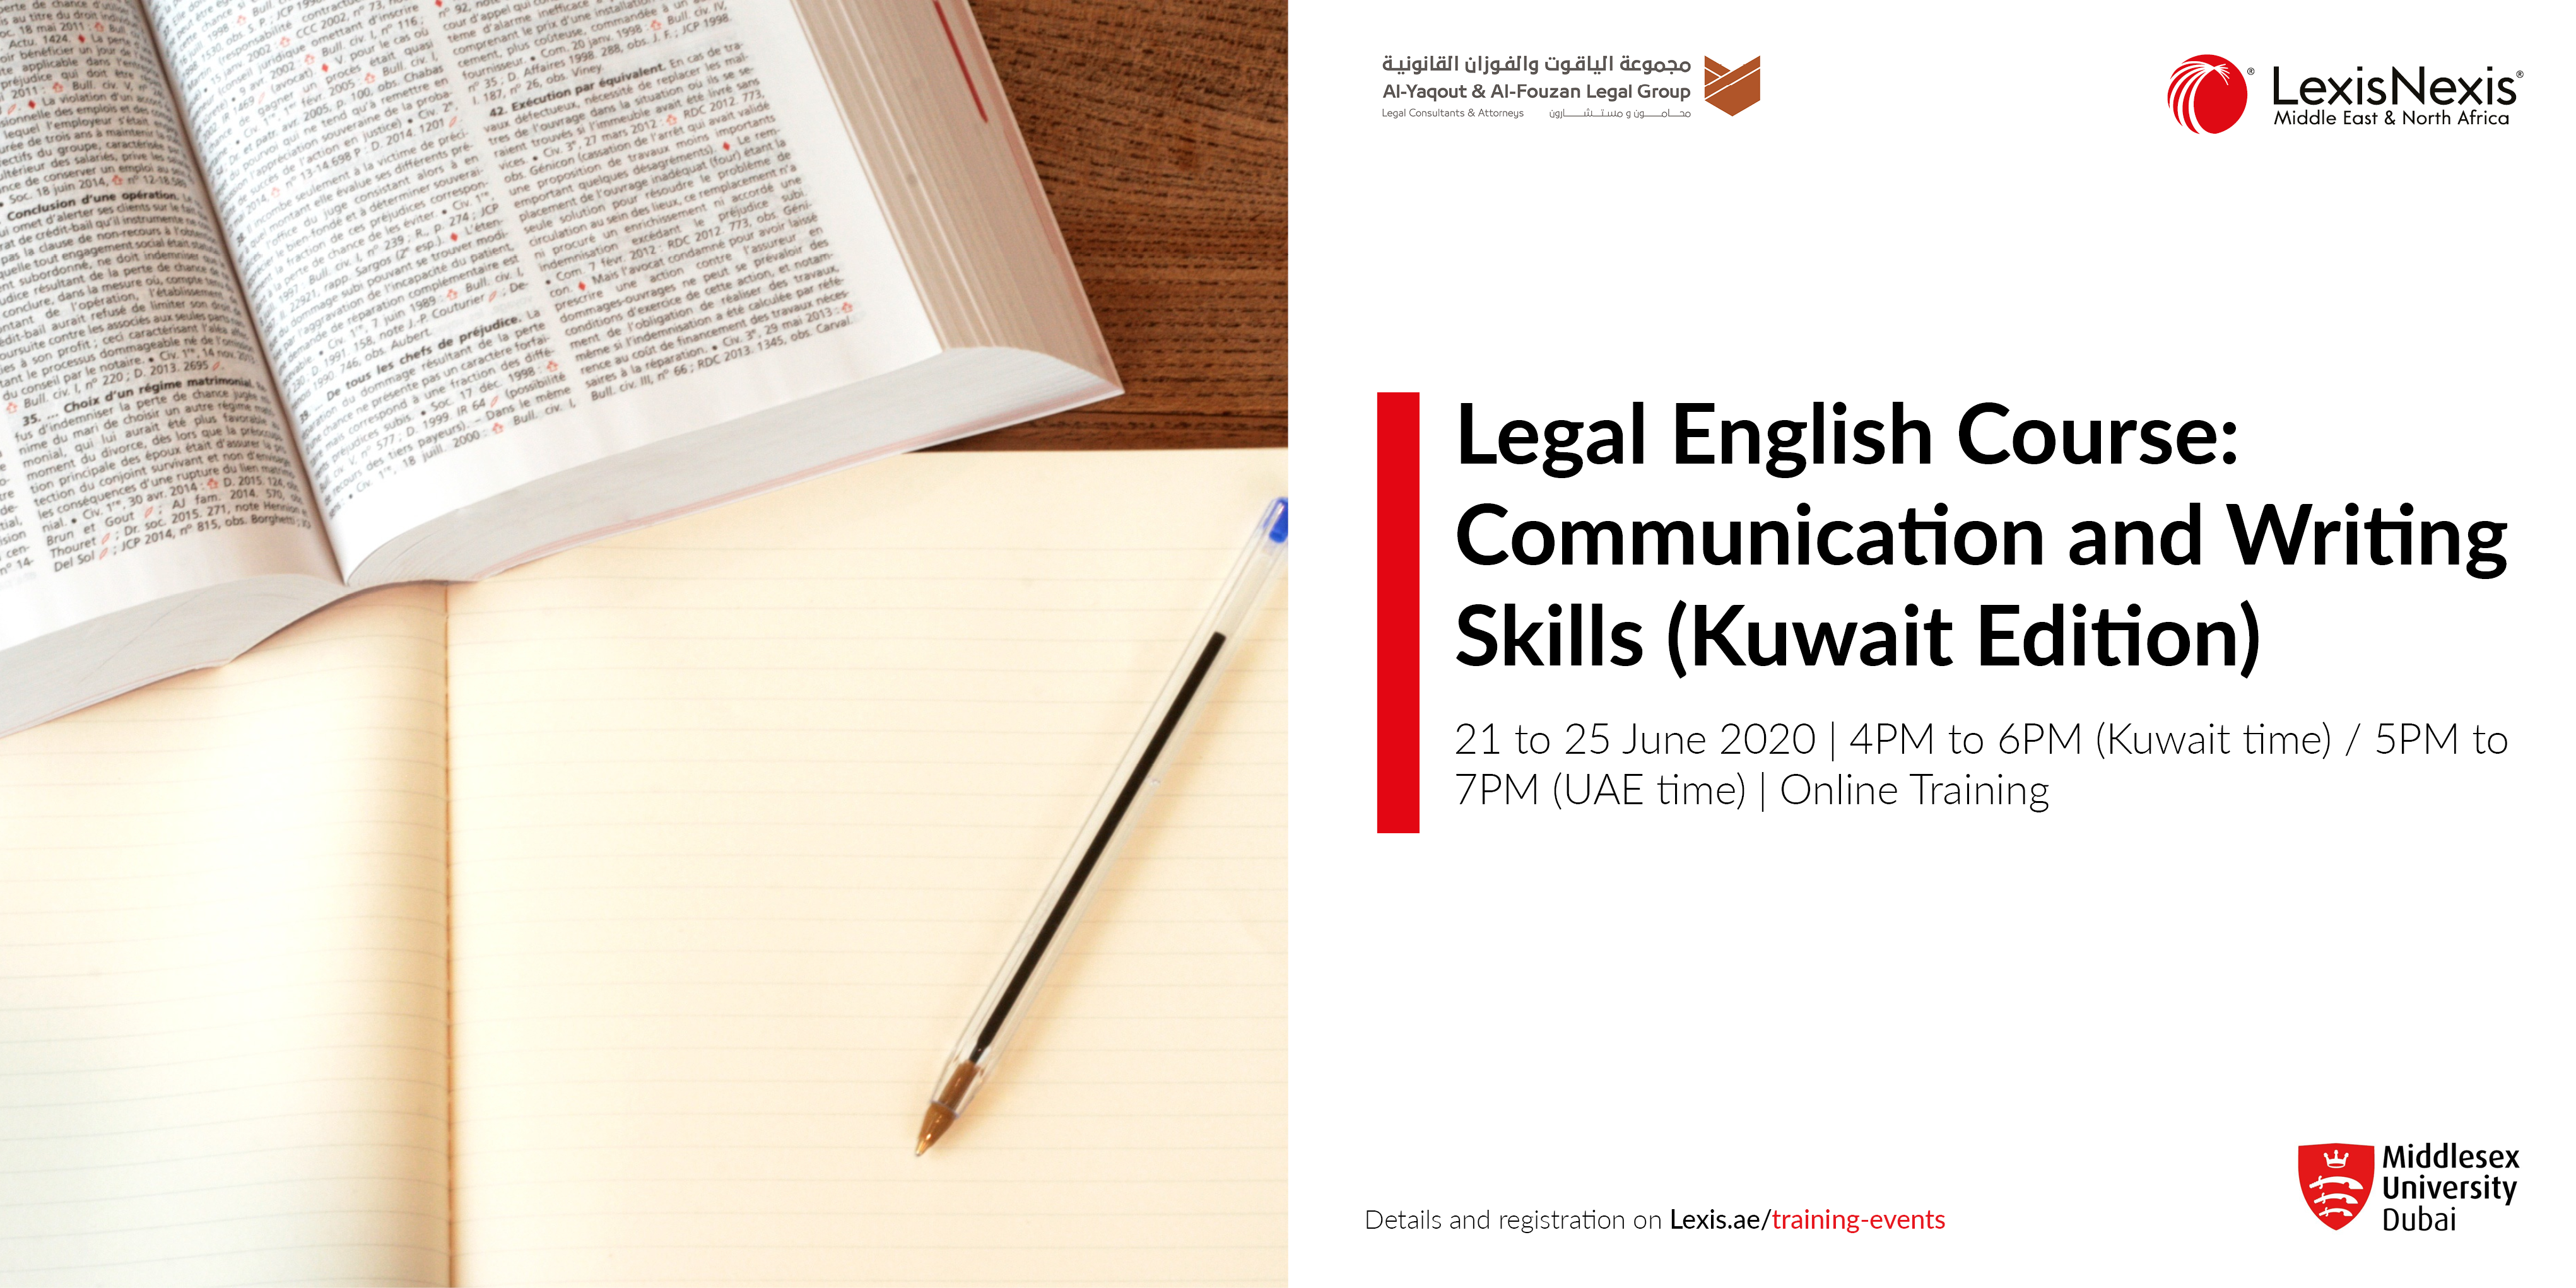 LEGAL ENGLISH COURSE: Communication and writing skills – KUWAIT Edition | 22-25 June 2020, Online Training